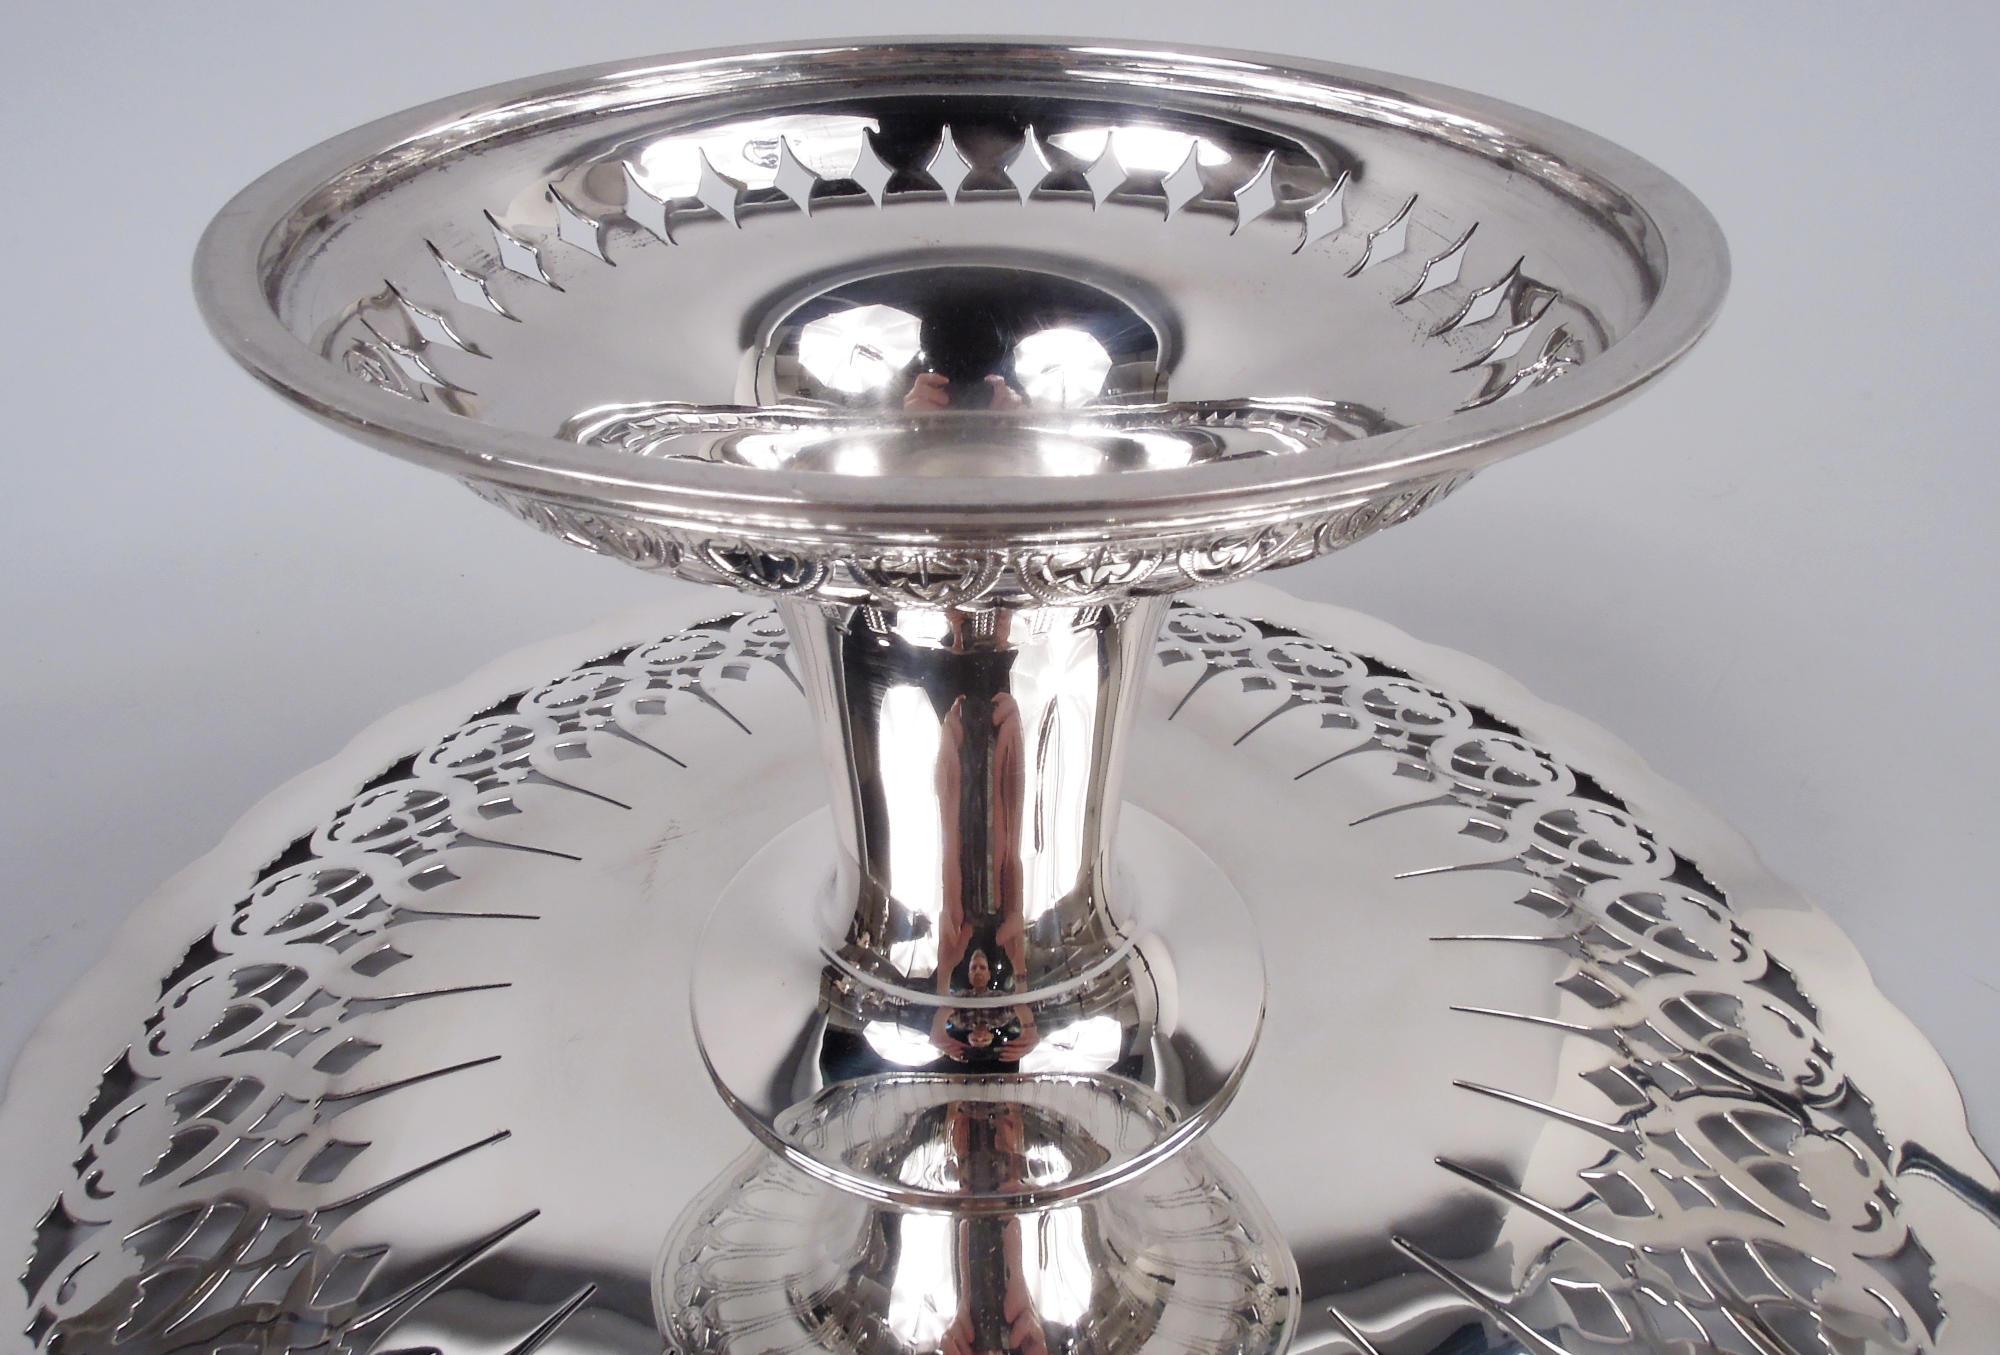 Large Tiffany American Edwardian Art Nouveau Sterling Silver Compote For Sale 4